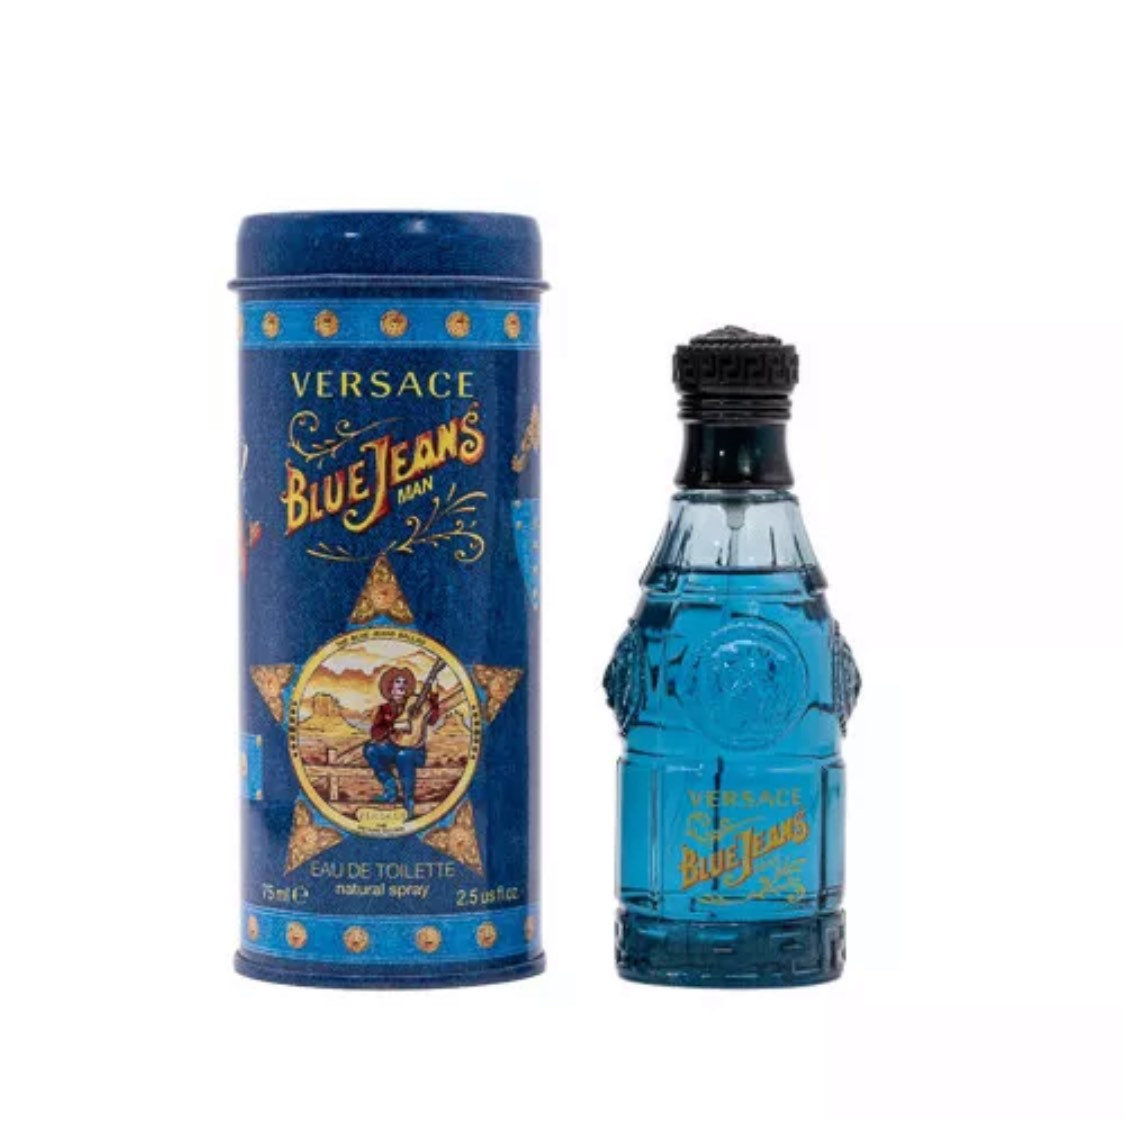 Blue Jeans by Versus Gianni Versace 2.5 oz EDT Cologne for Men New In ...